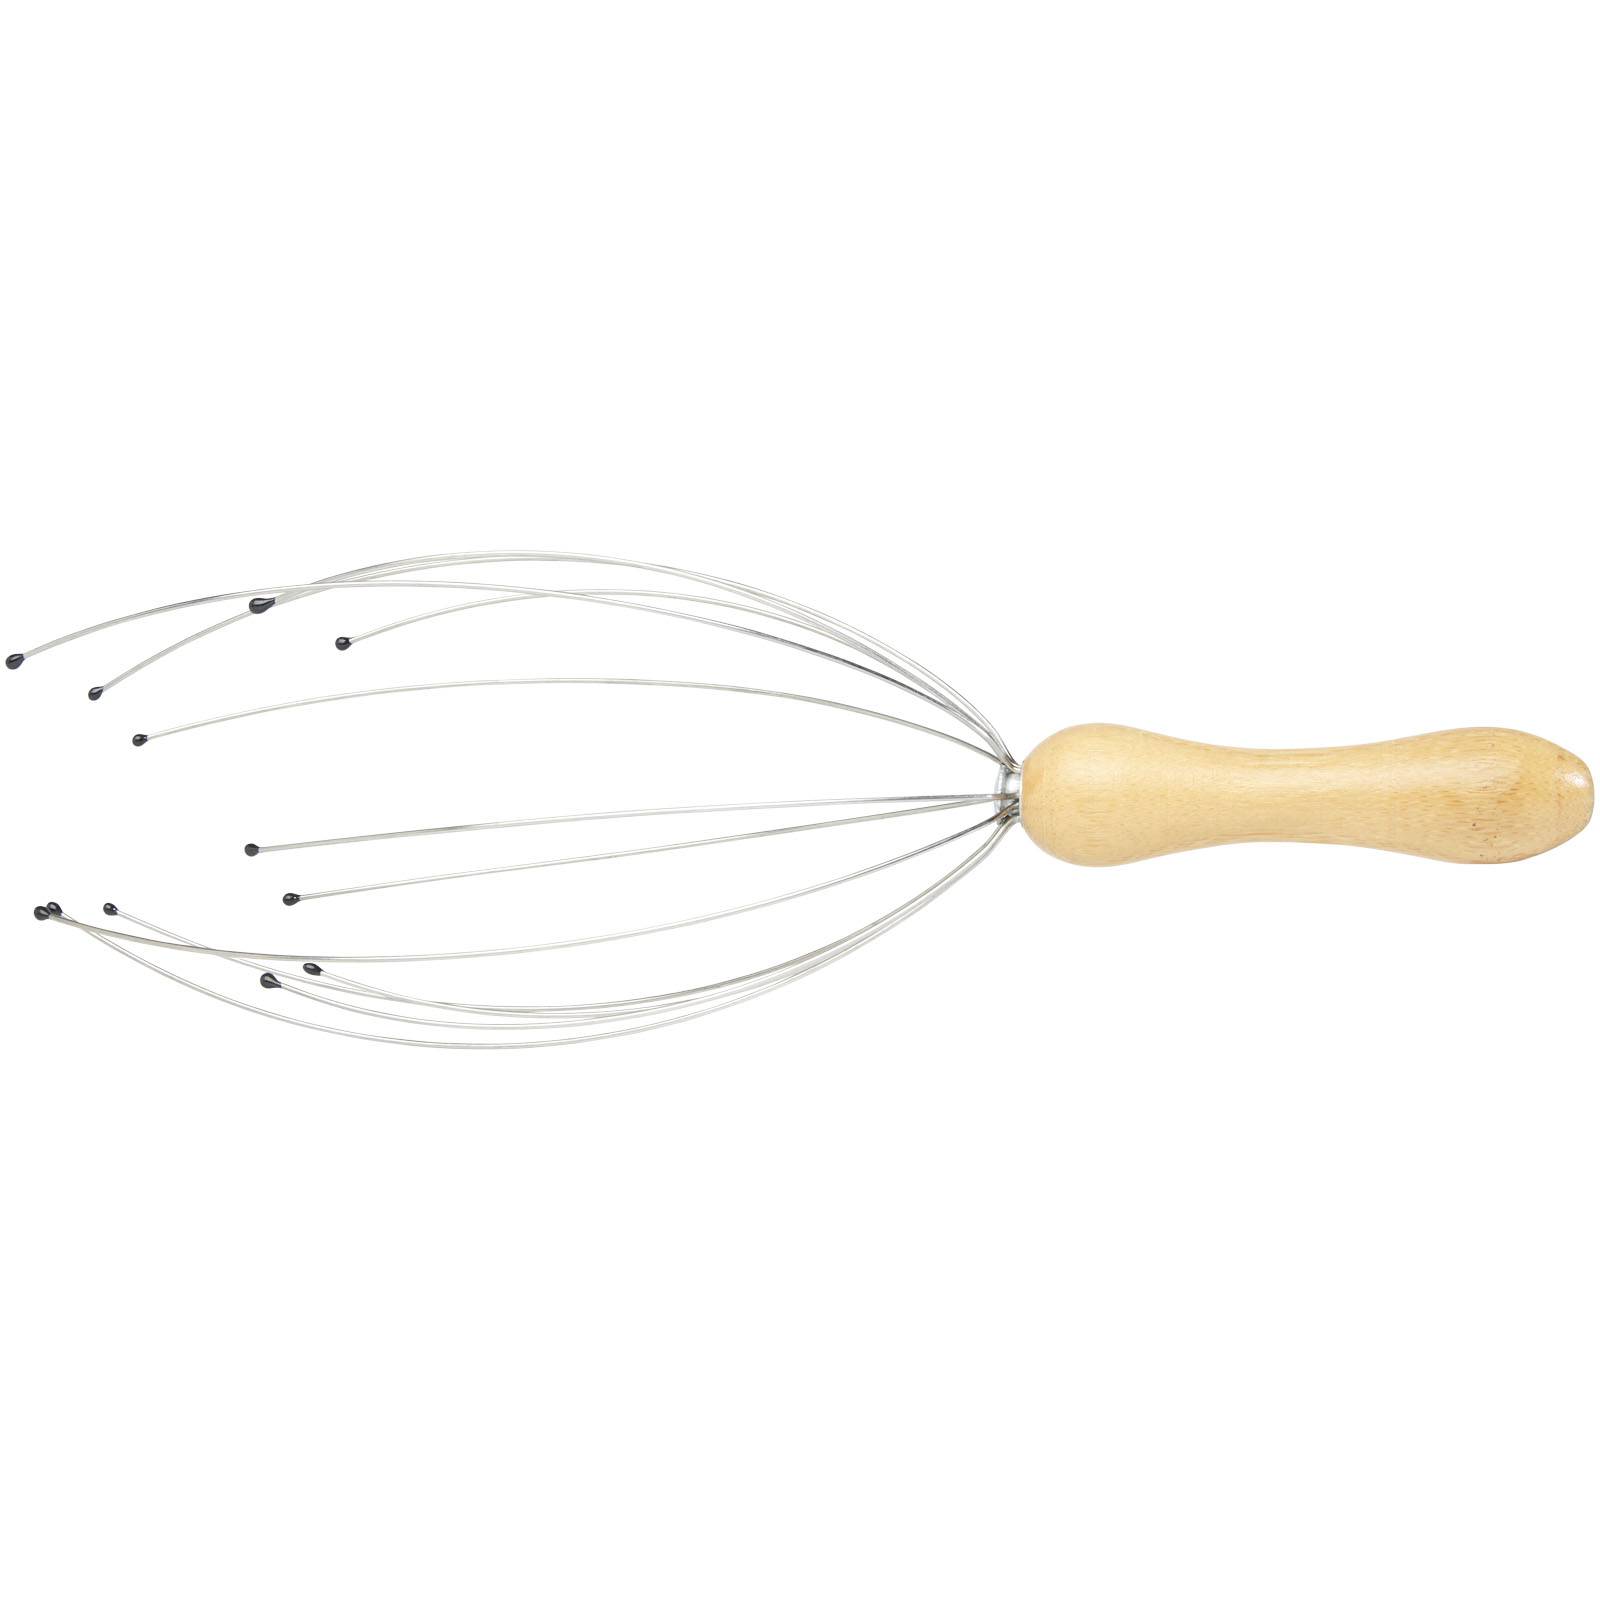 Advertising Personal Care - Hator bamboo head massager - 1